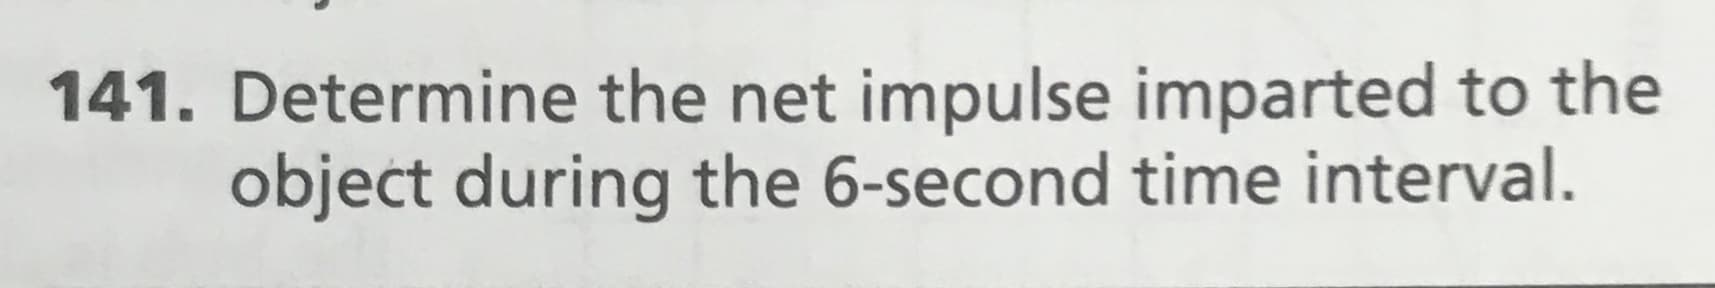 141. Determine the net impulse imparted to the
object during the 6-second time interval.
